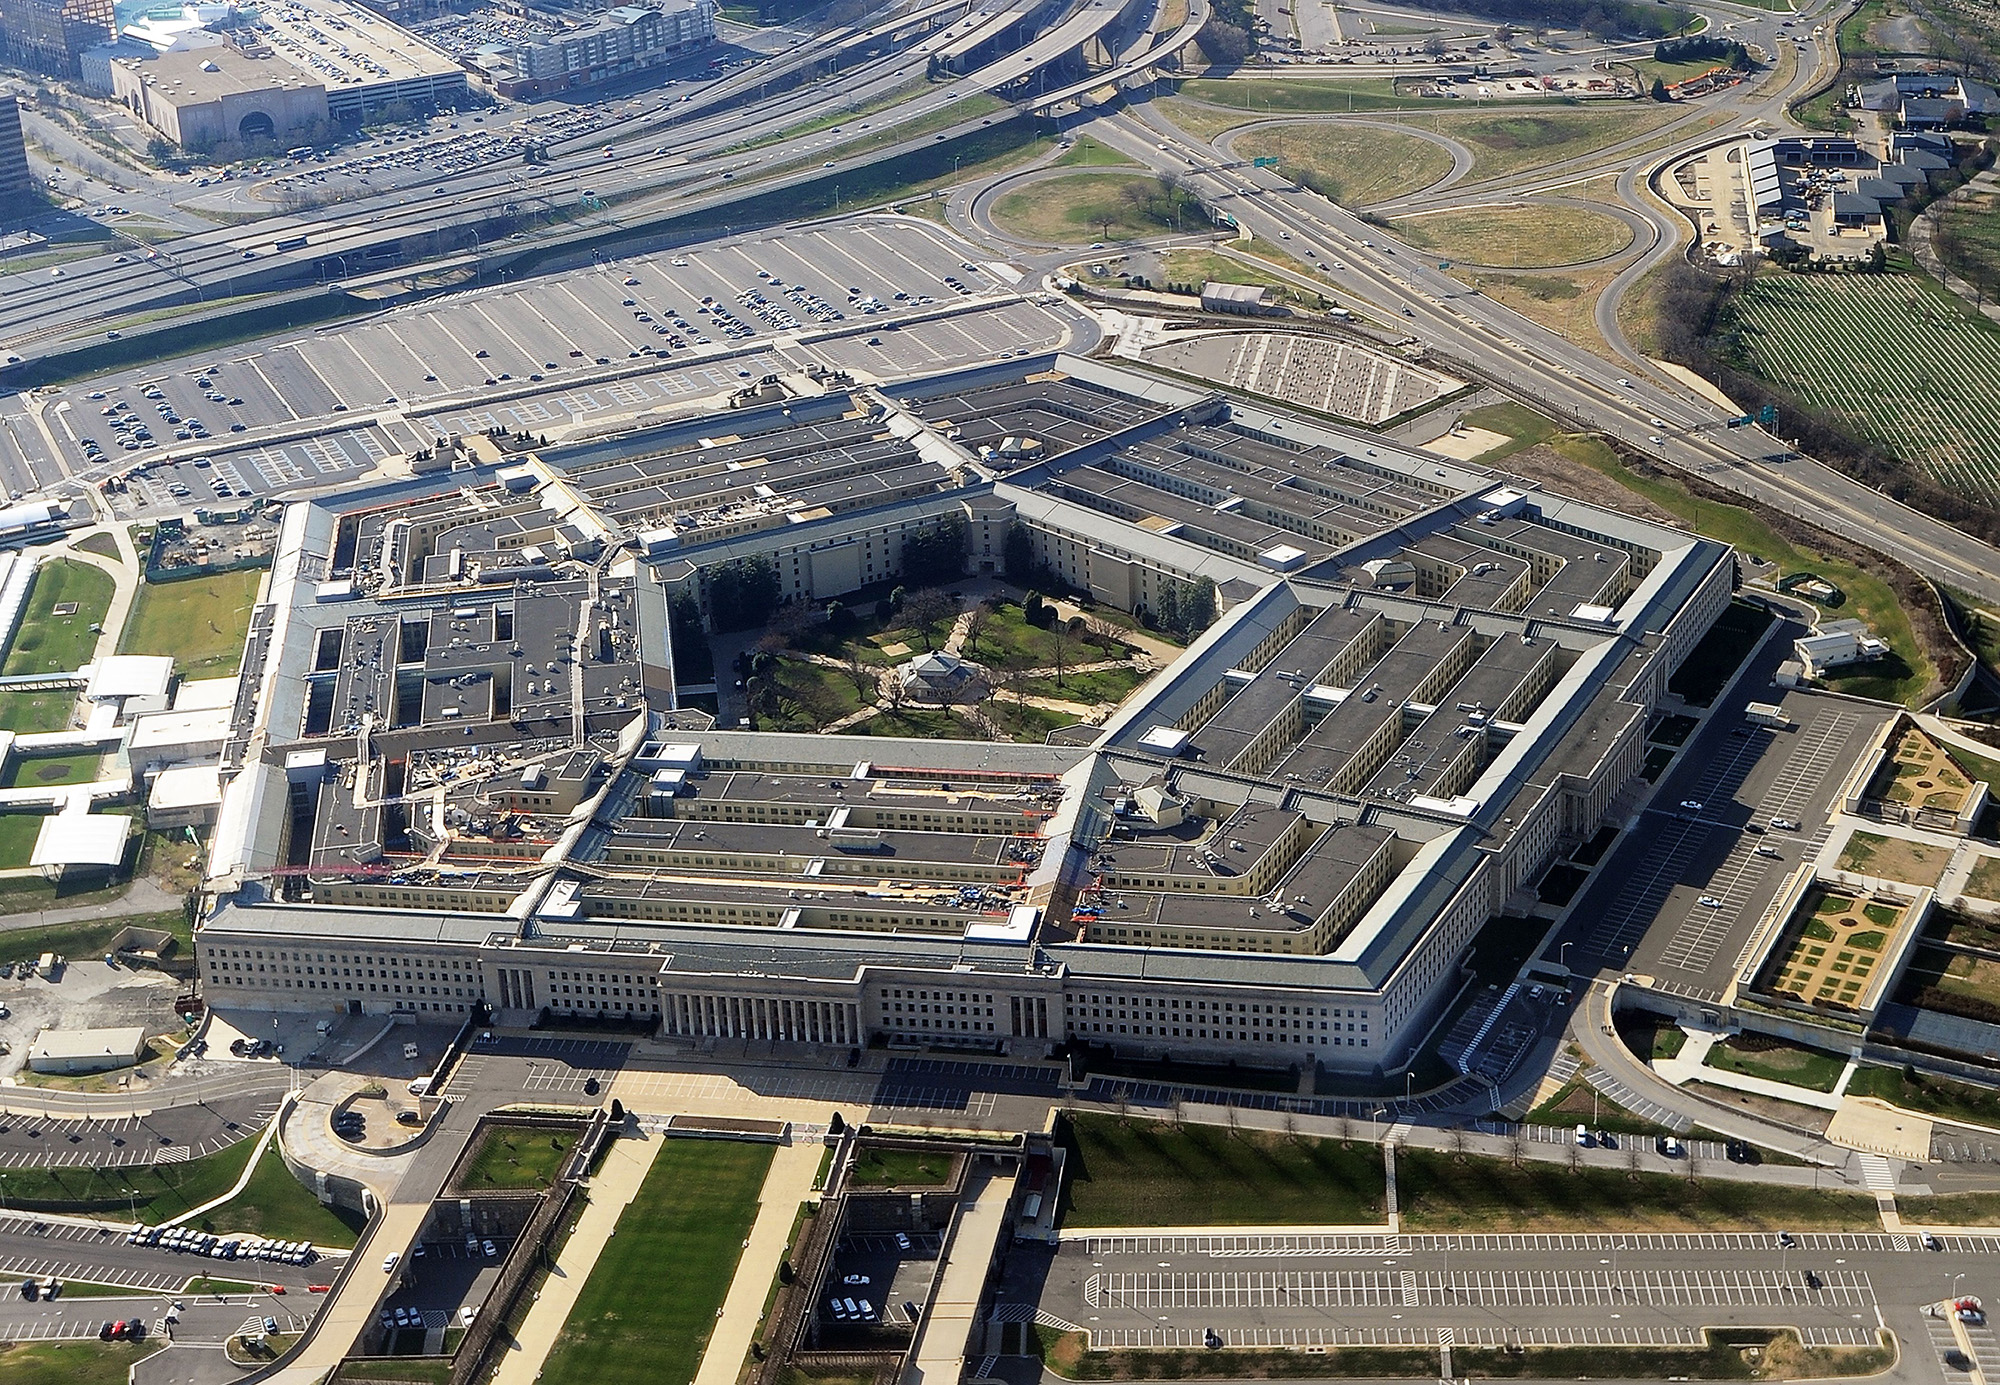 Pentagon Employee Mobile App Use Found to Violate Policies 